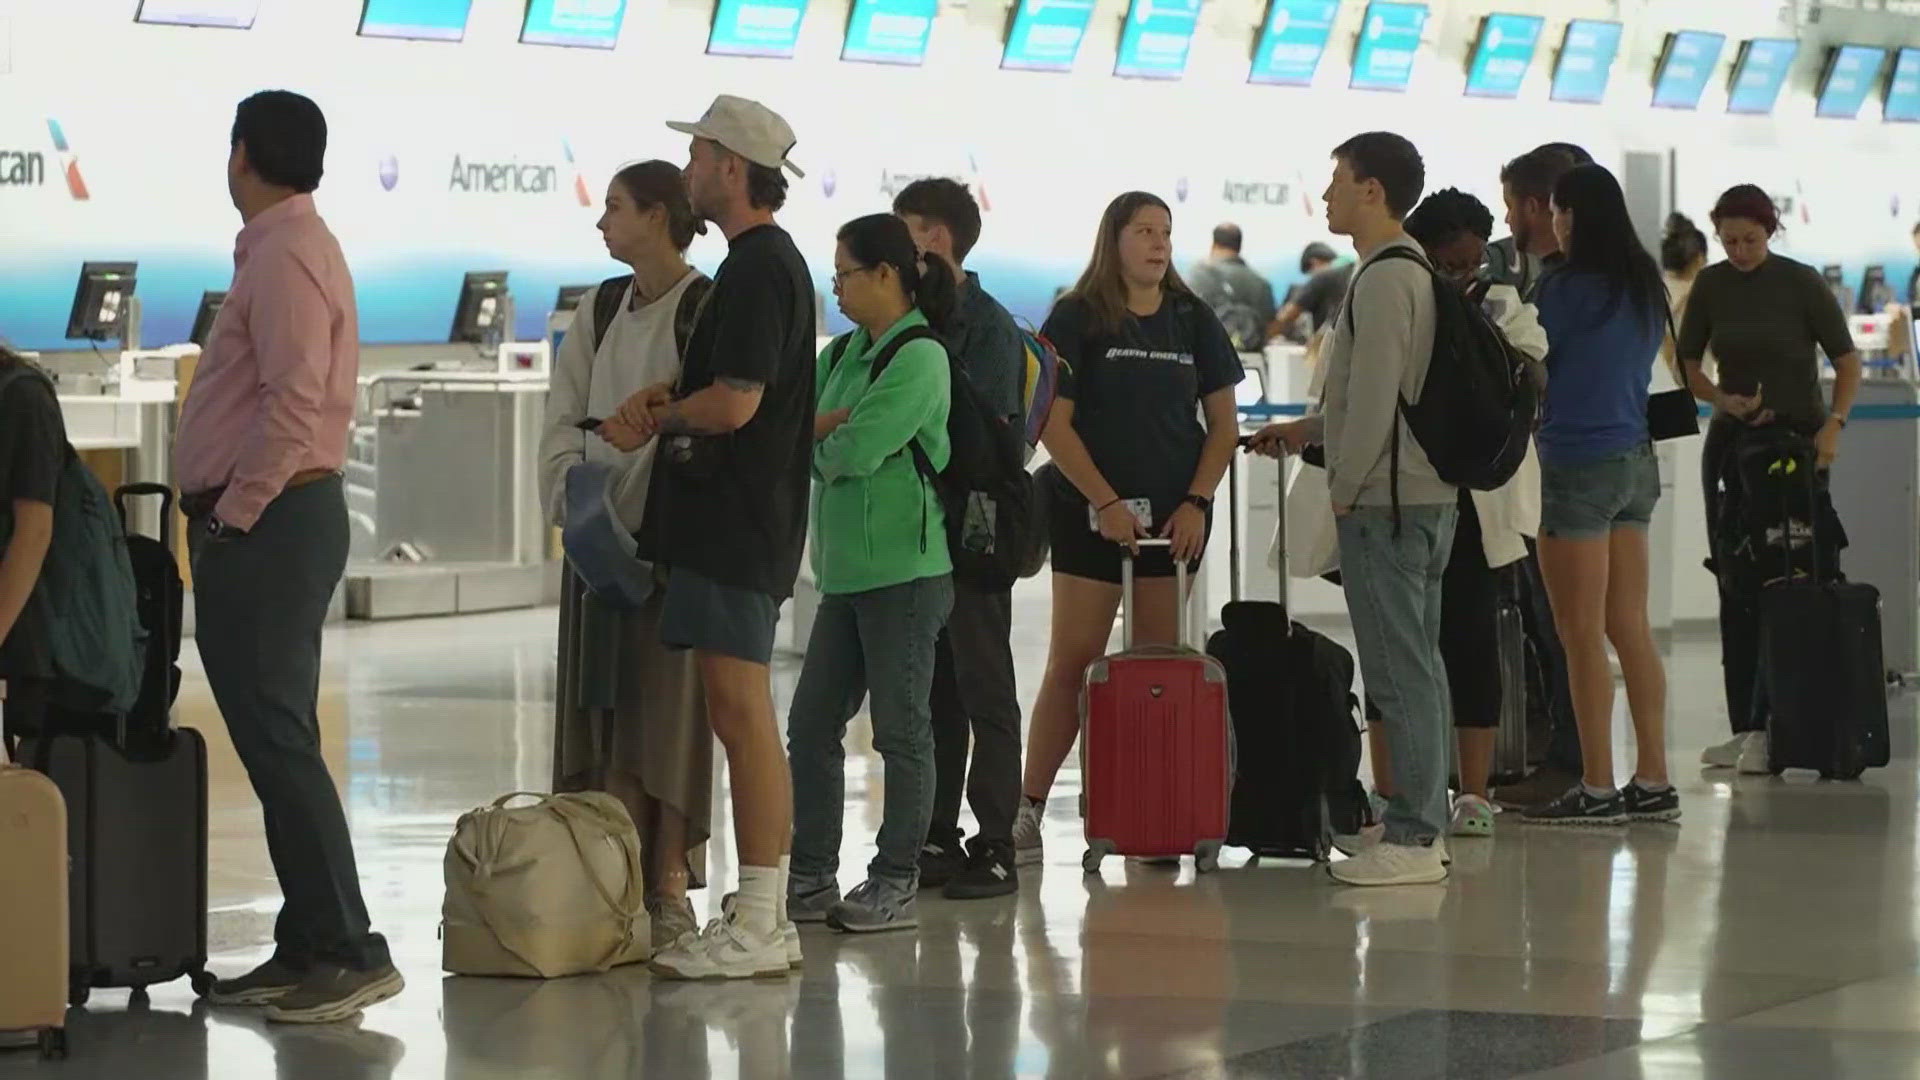 32 million people are expected to travel by plane this Independence Day, many of them coming through DFW Airport.